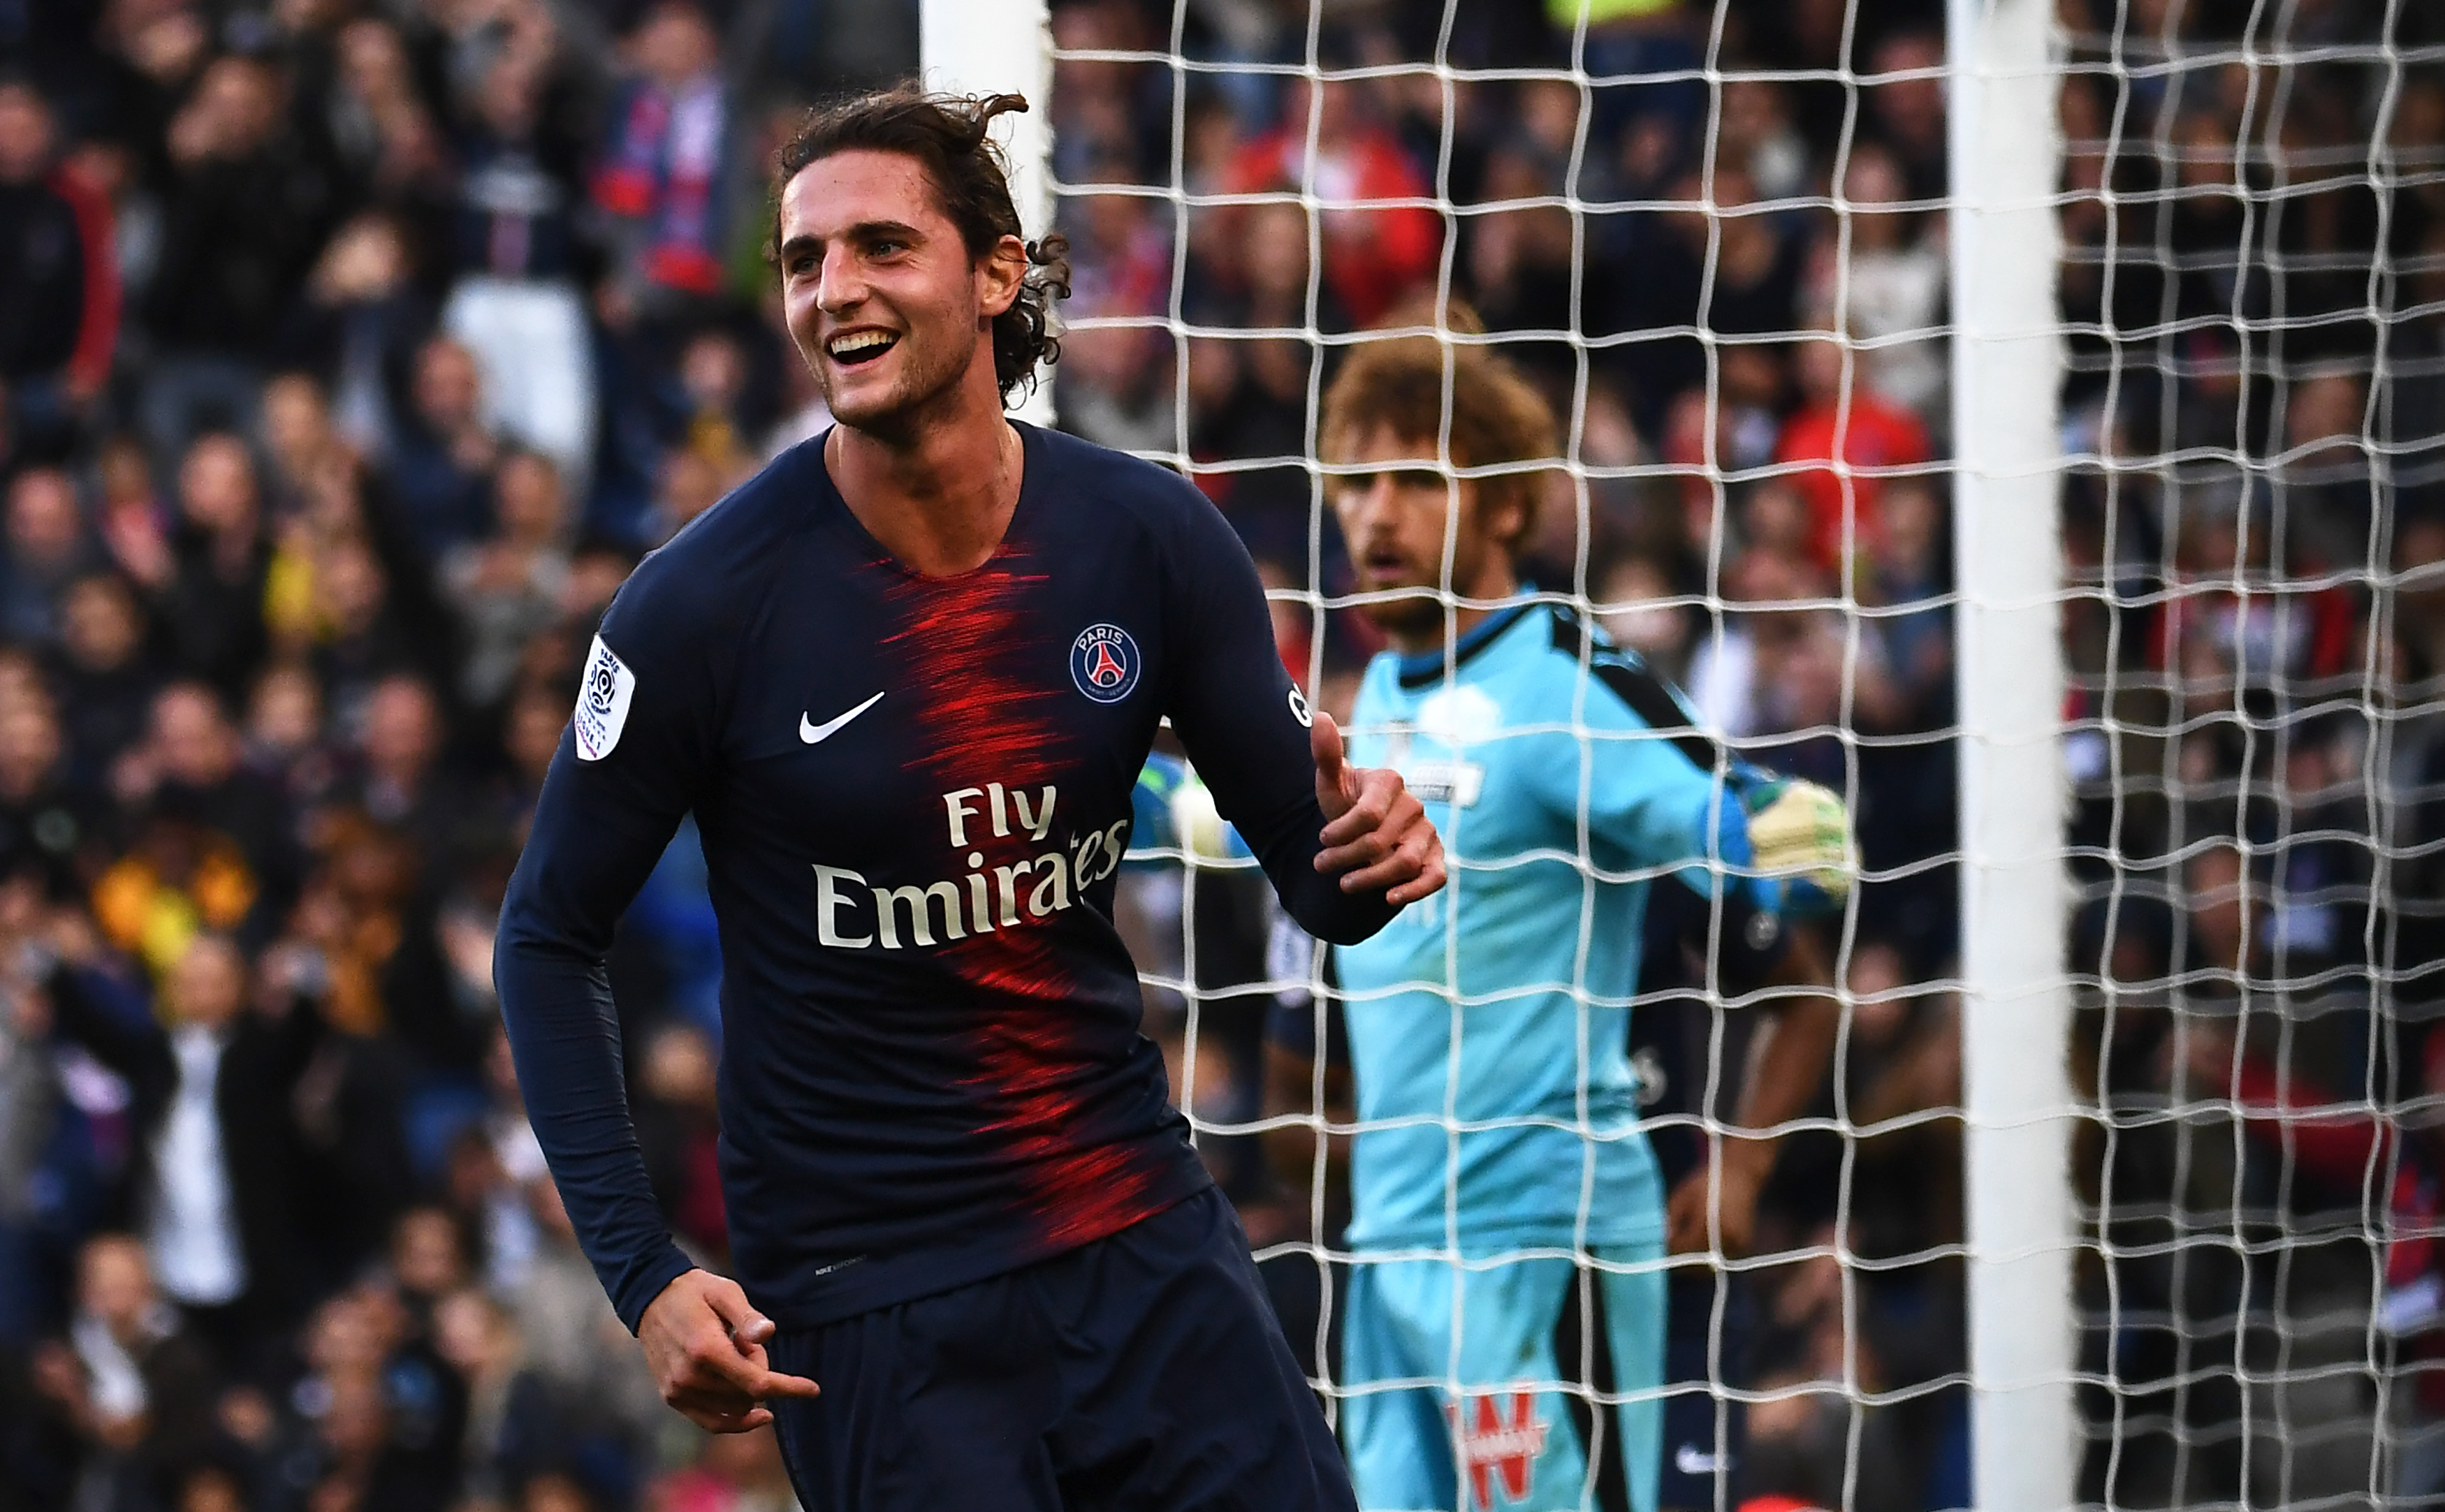 Paris Saint-Germain's French midfielder Adrien Rabiot celebrates after scoring his team's second goal during the French L1 football match between Paris Saint-Germain (PSG) and Amiens at the Parc des Princes stadium in Paris on October 20, 2018. (Photo by Anne-Christine POUJOULAT / AFP)        (Photo credit should read ANNE-CHRISTINE POUJOULAT/AFP/Getty Images)